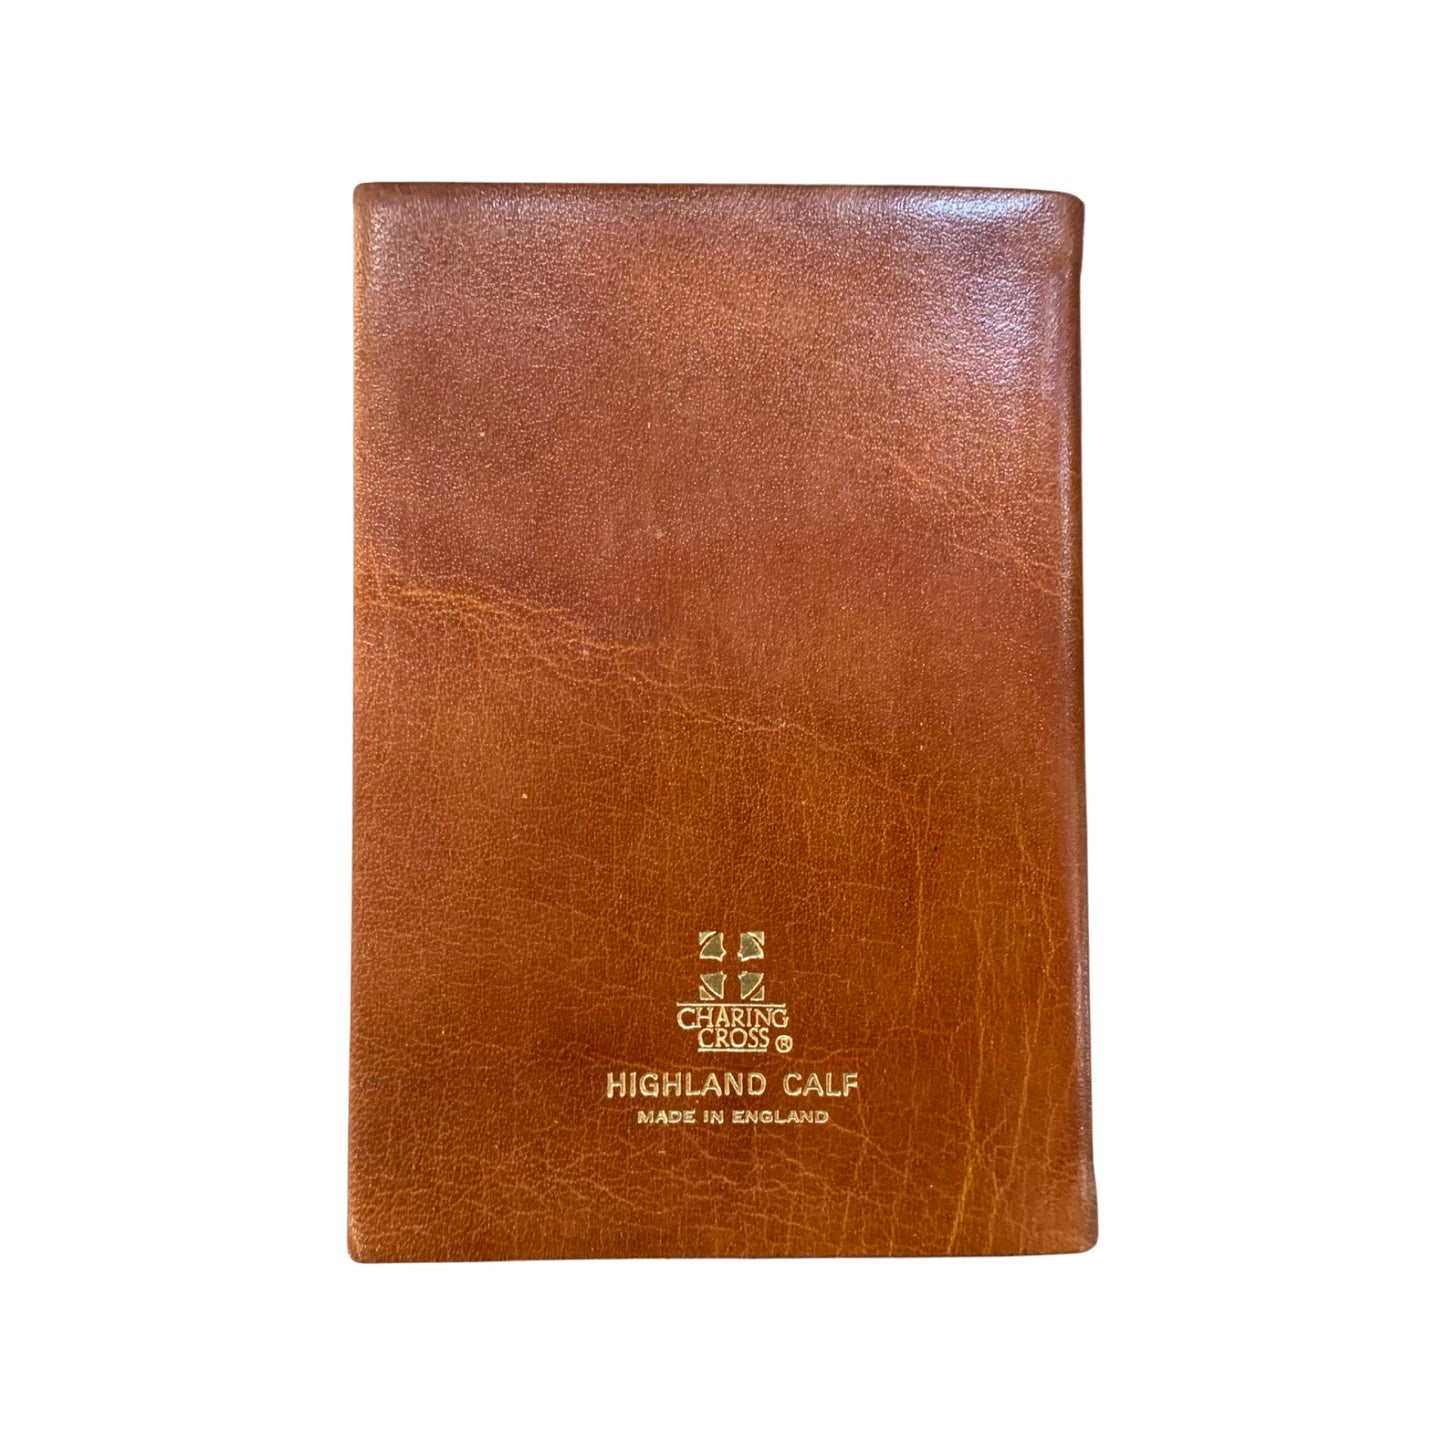 Address Book | Leather Pocket Address Book | 4 by 2.5 inches | Highland Calf | Charing Cross | No. A42HC